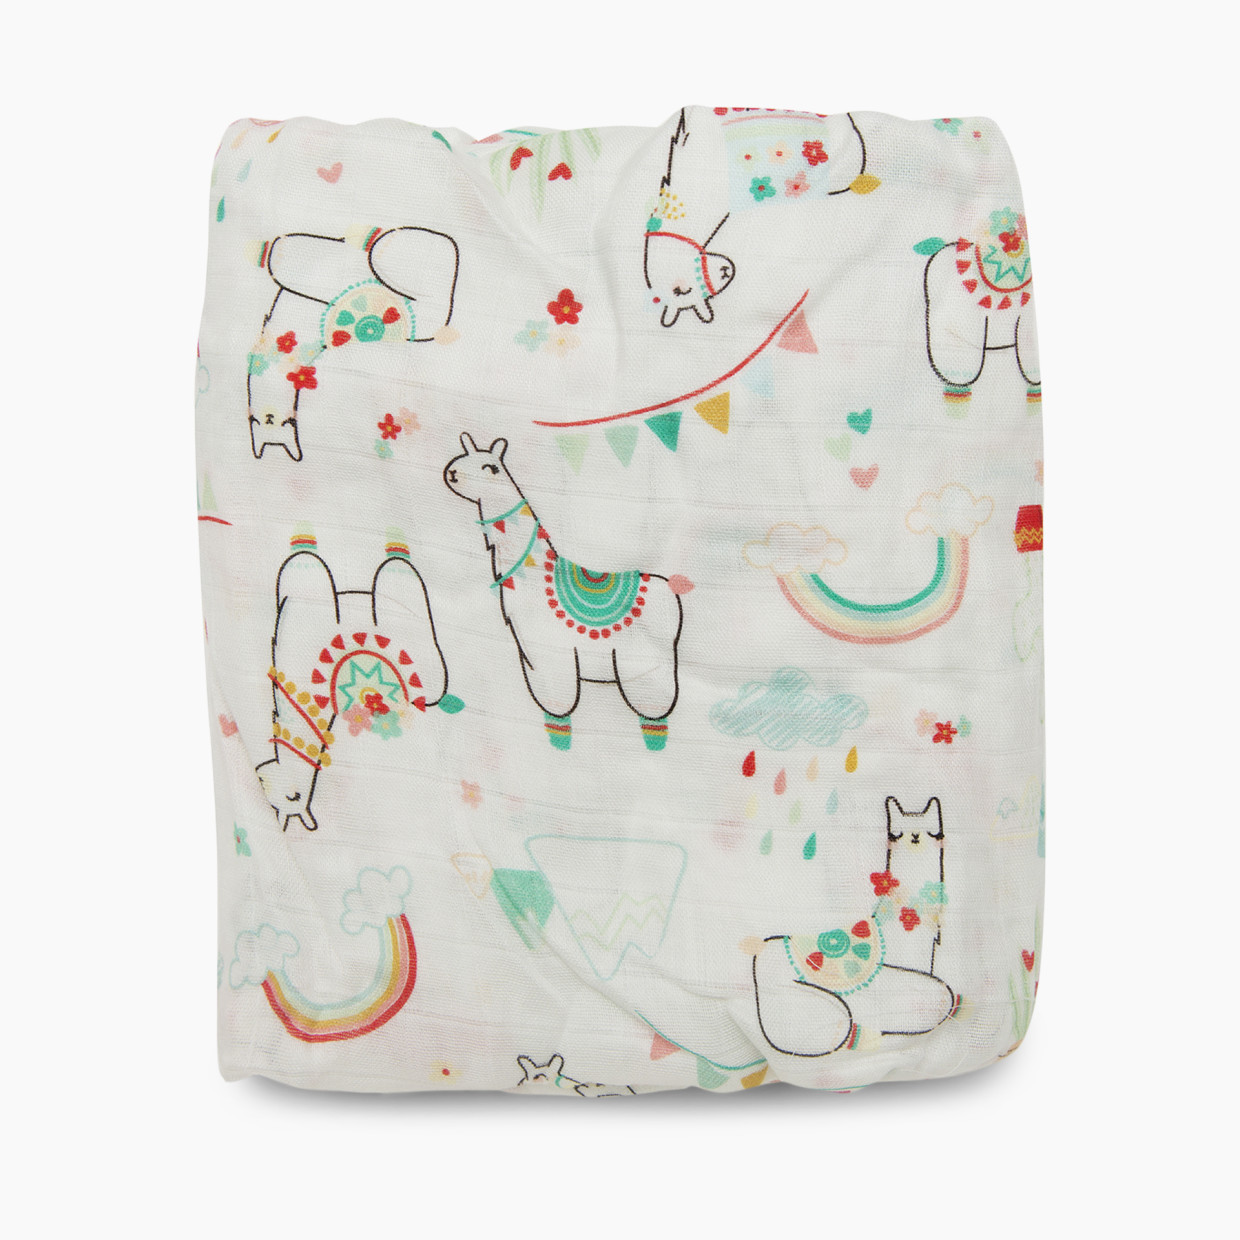 Loulou Lollipop Cotton & Bamboo Fitted Crib Sheet - Llama.